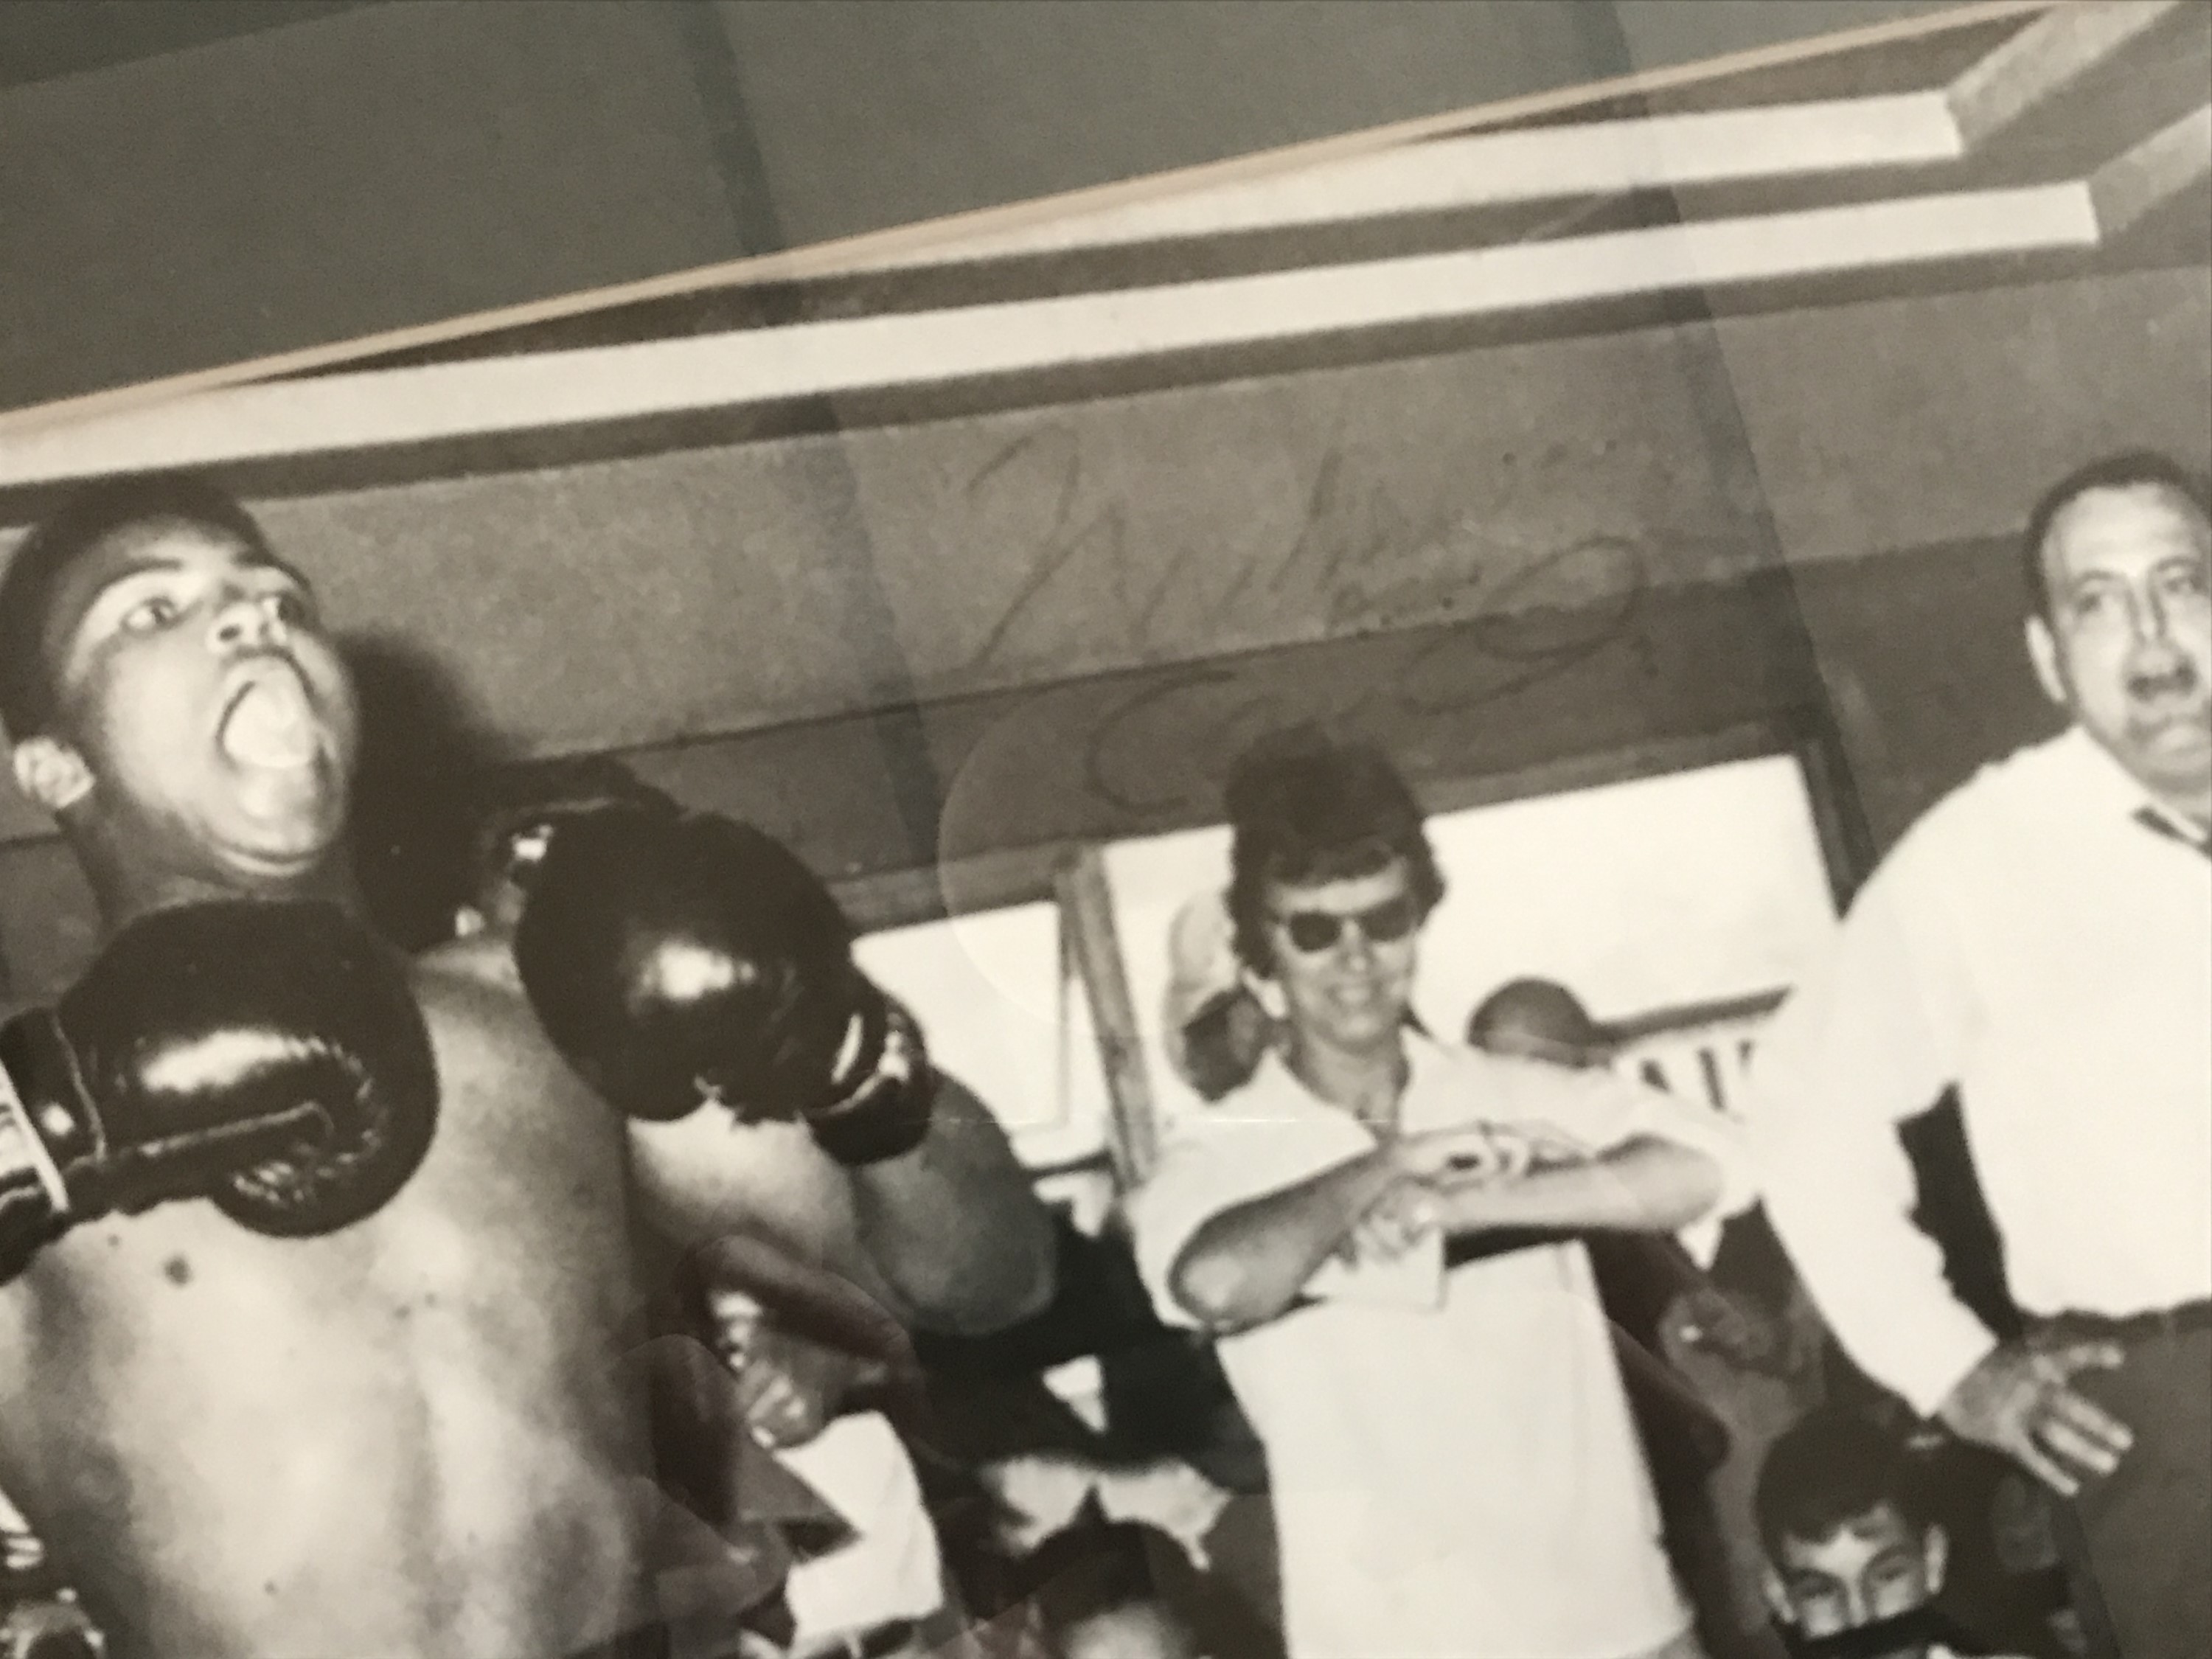 [Autograph / Muhammad Ali / The Beatles] Signed candid photographic print depicting Cassius Clay ( - Image 3 of 3